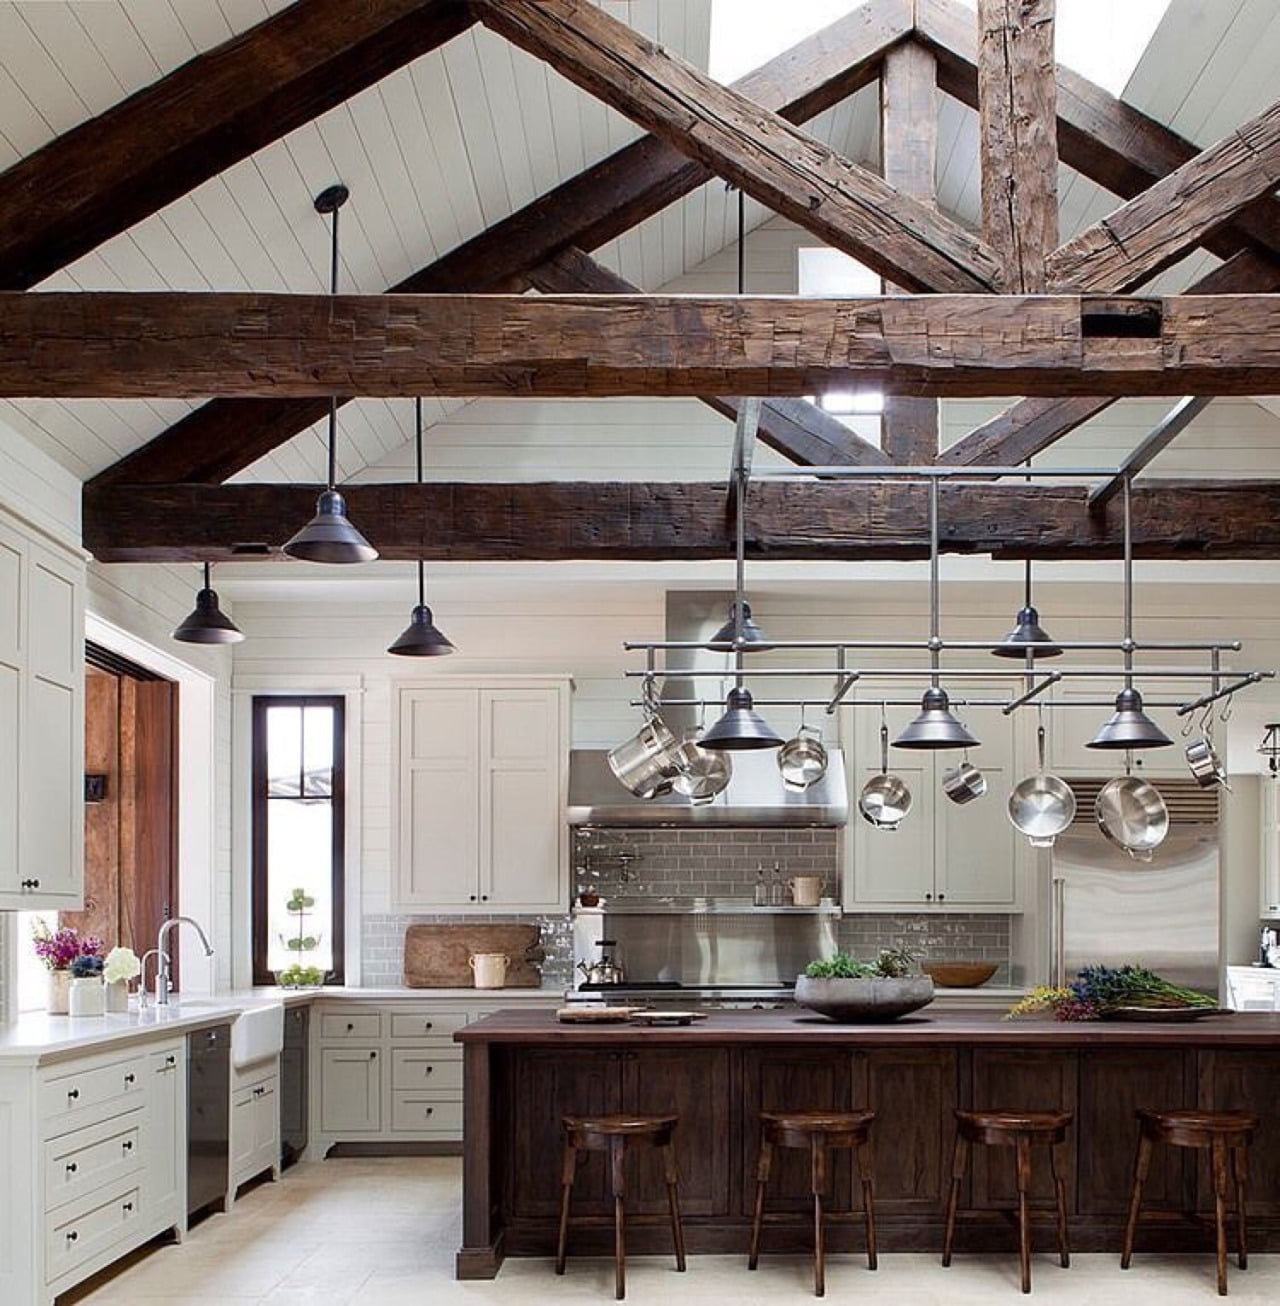 A Hefty Island Resonates with these Dominant Ceiling Trusses